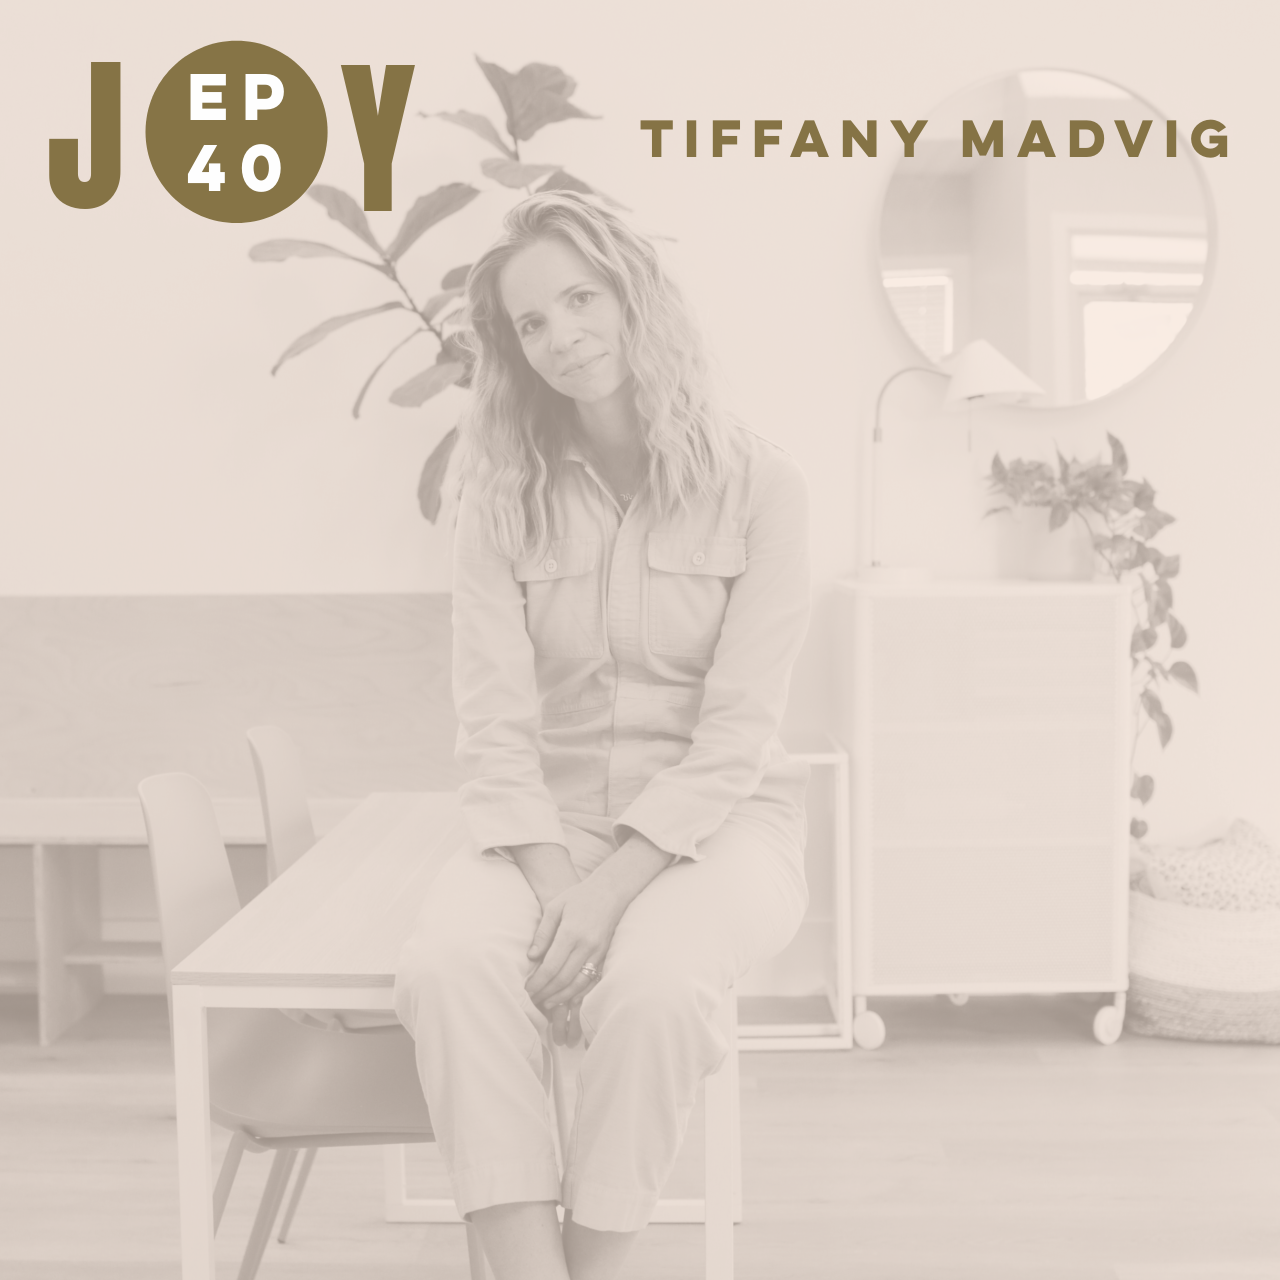 JOY IS NOW: LET'S TALK ENVY WITH TIFFANY MADVIG